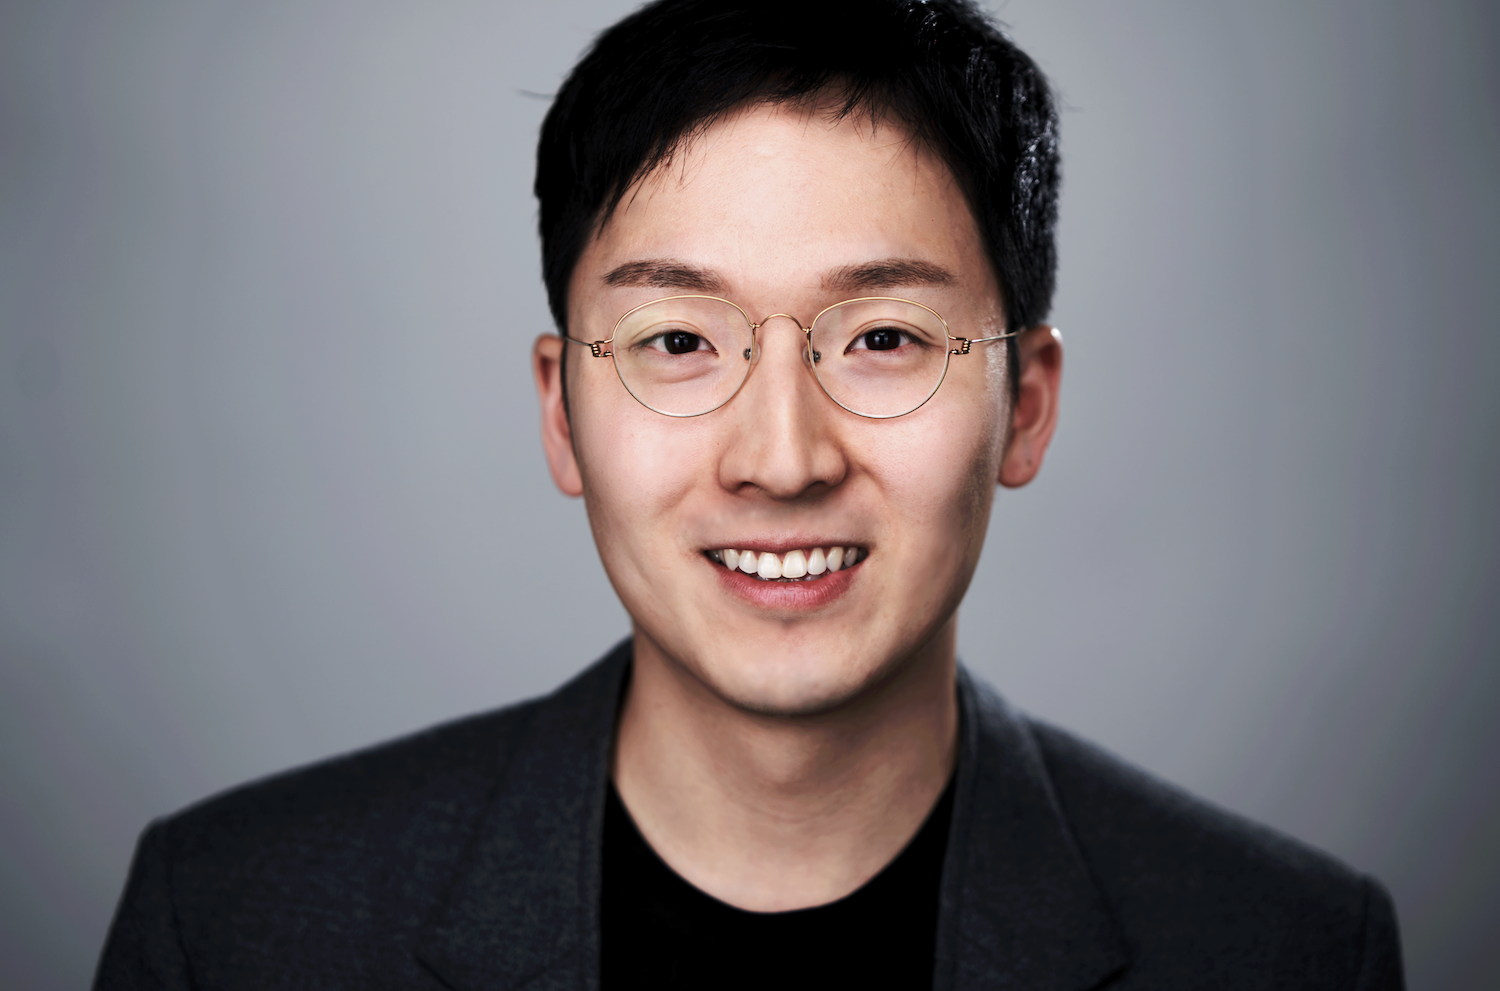 Amogy co-founder and CEO Seonghoon Woo poses for a photo